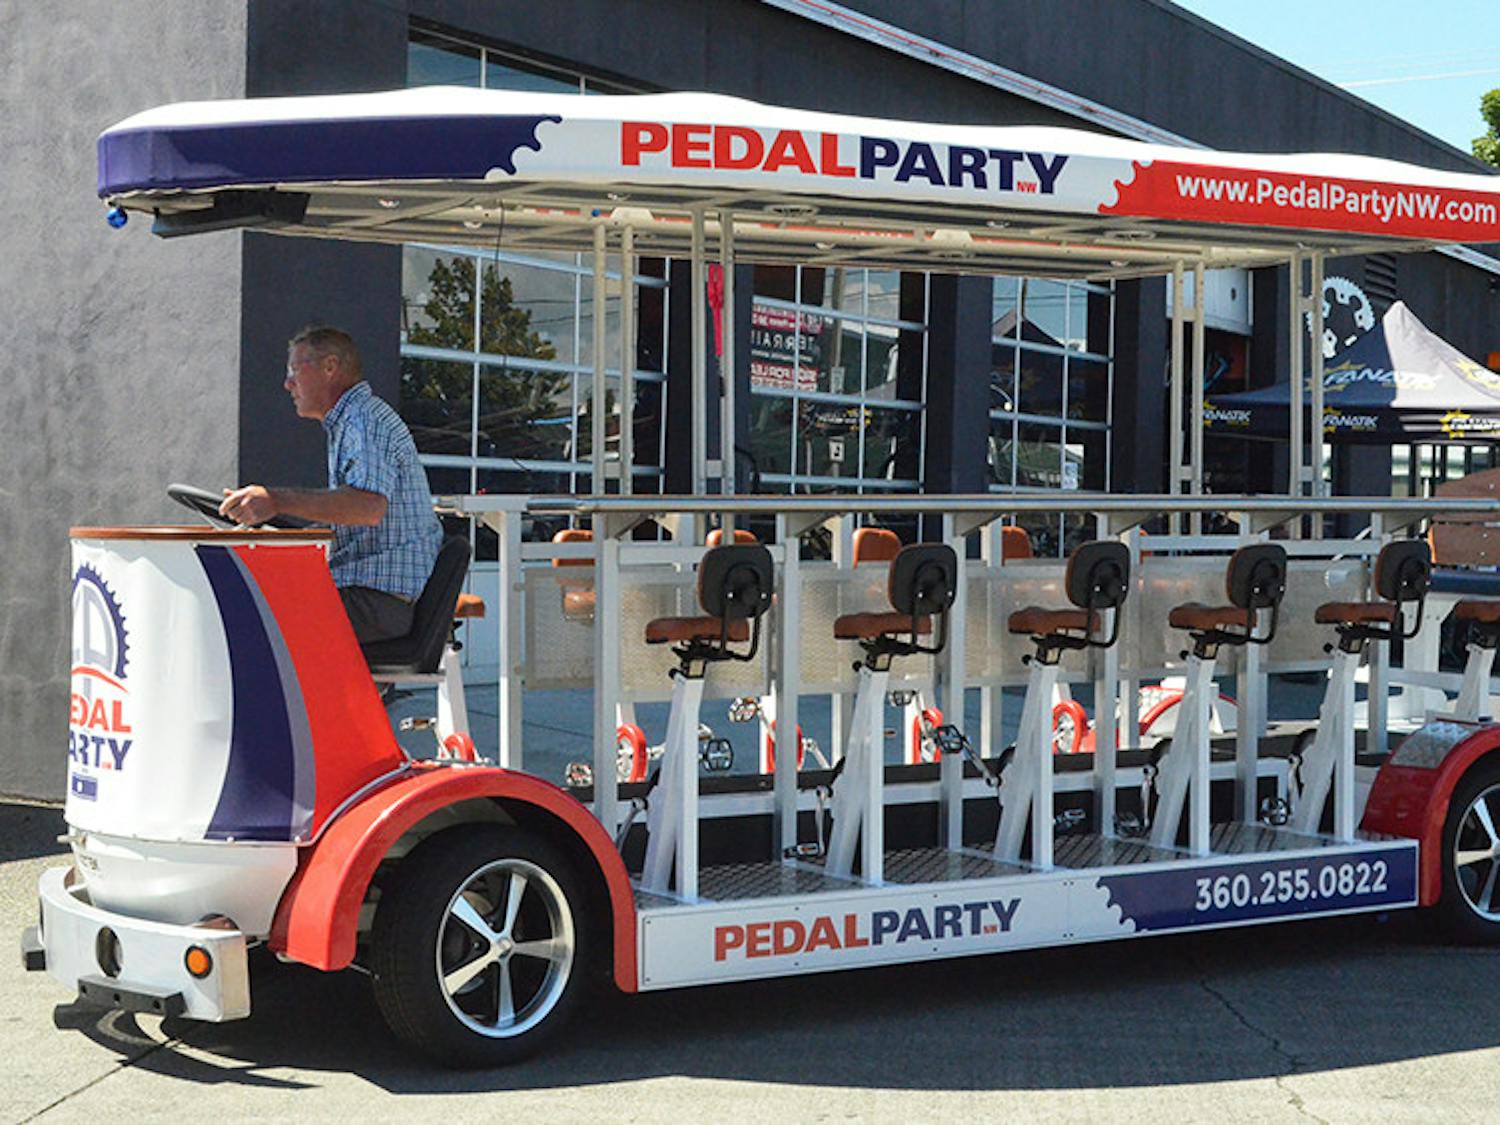 Pedal-Party-online-2